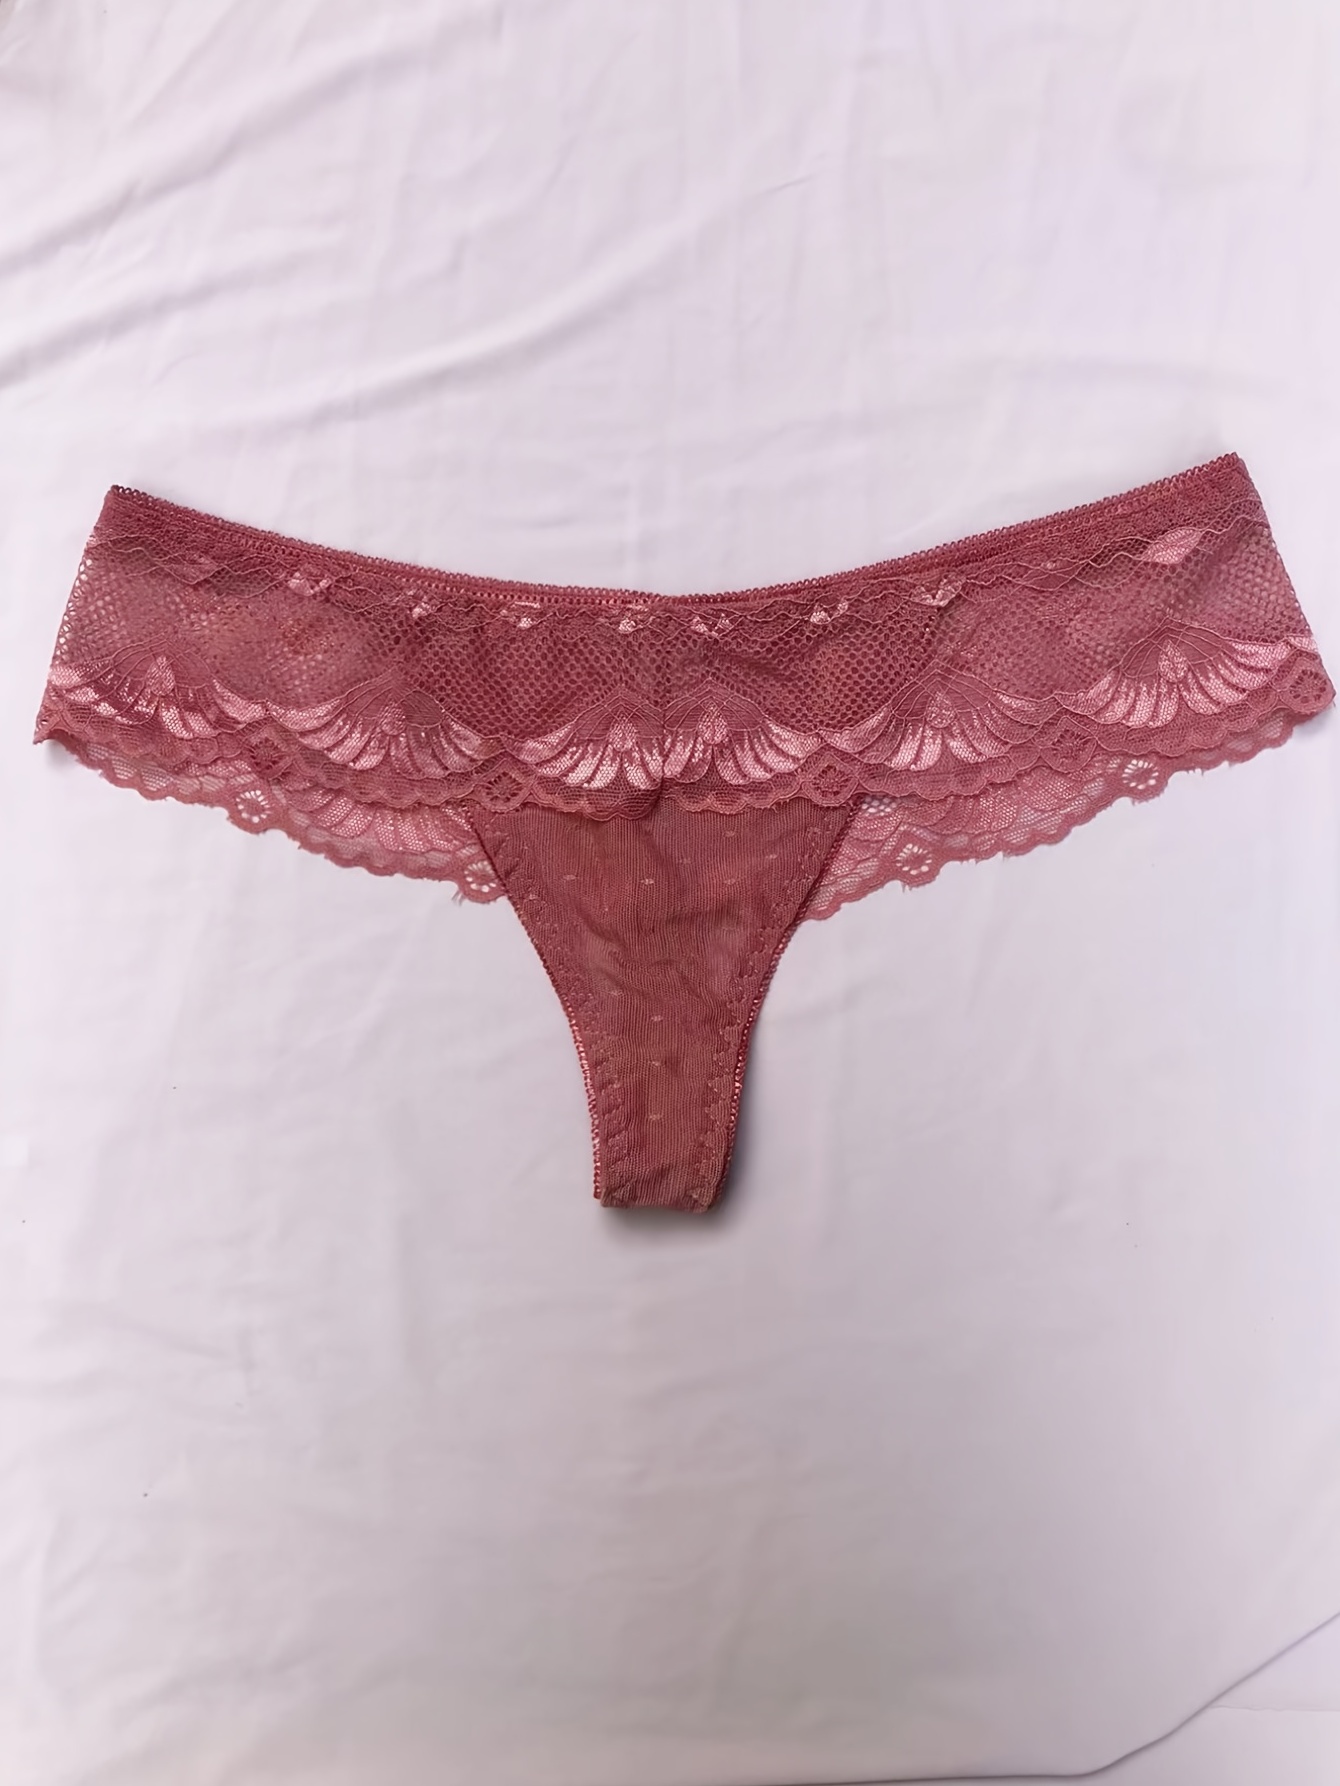 Embroidered Ladies Lace Panty